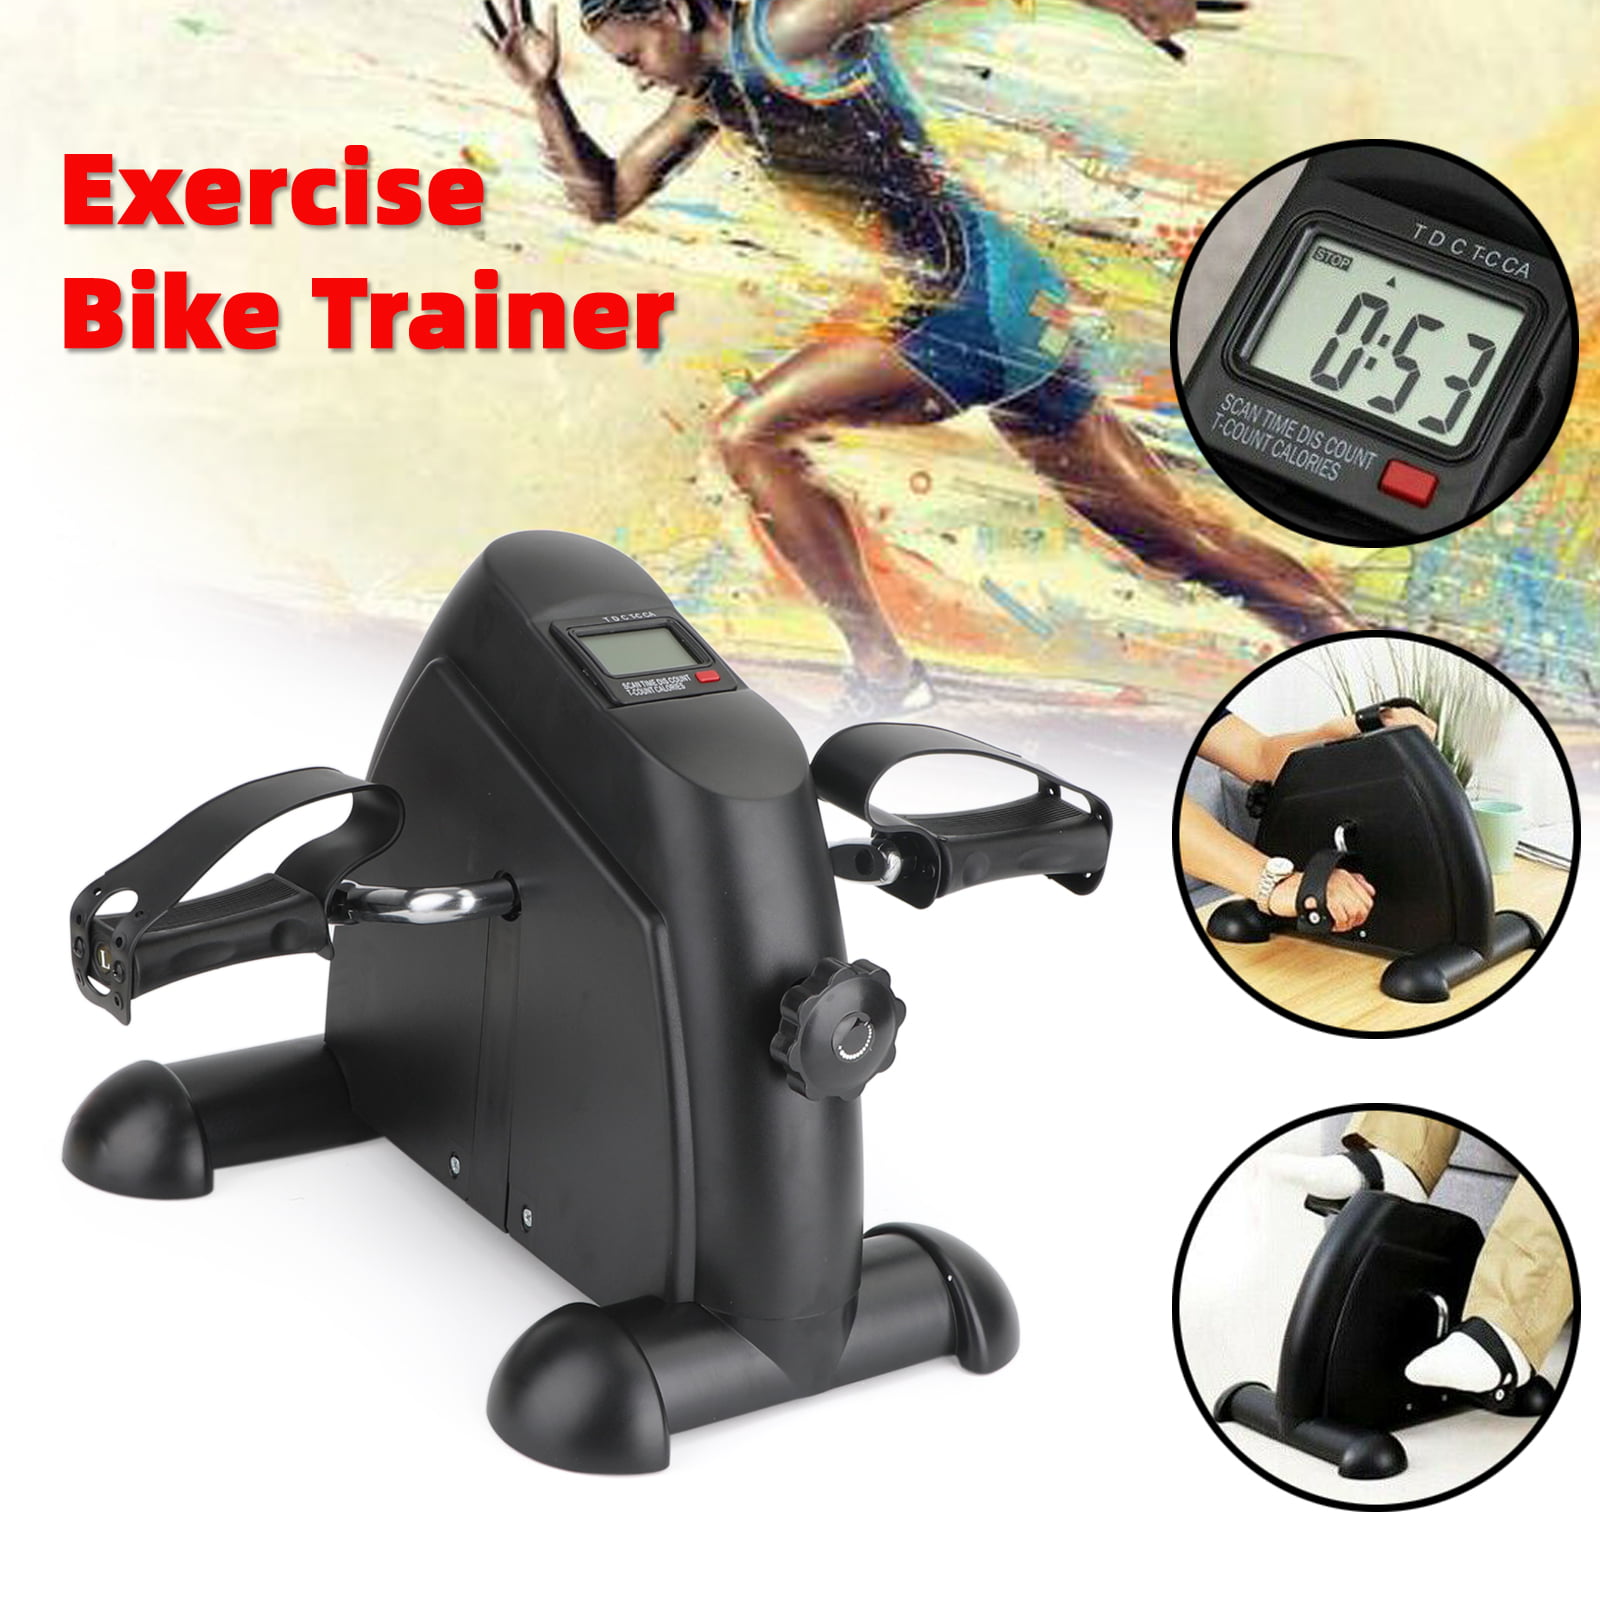 Stationary Exercise Bike Portable Arm Leg Foot Pedal Stepper With Handlebar US